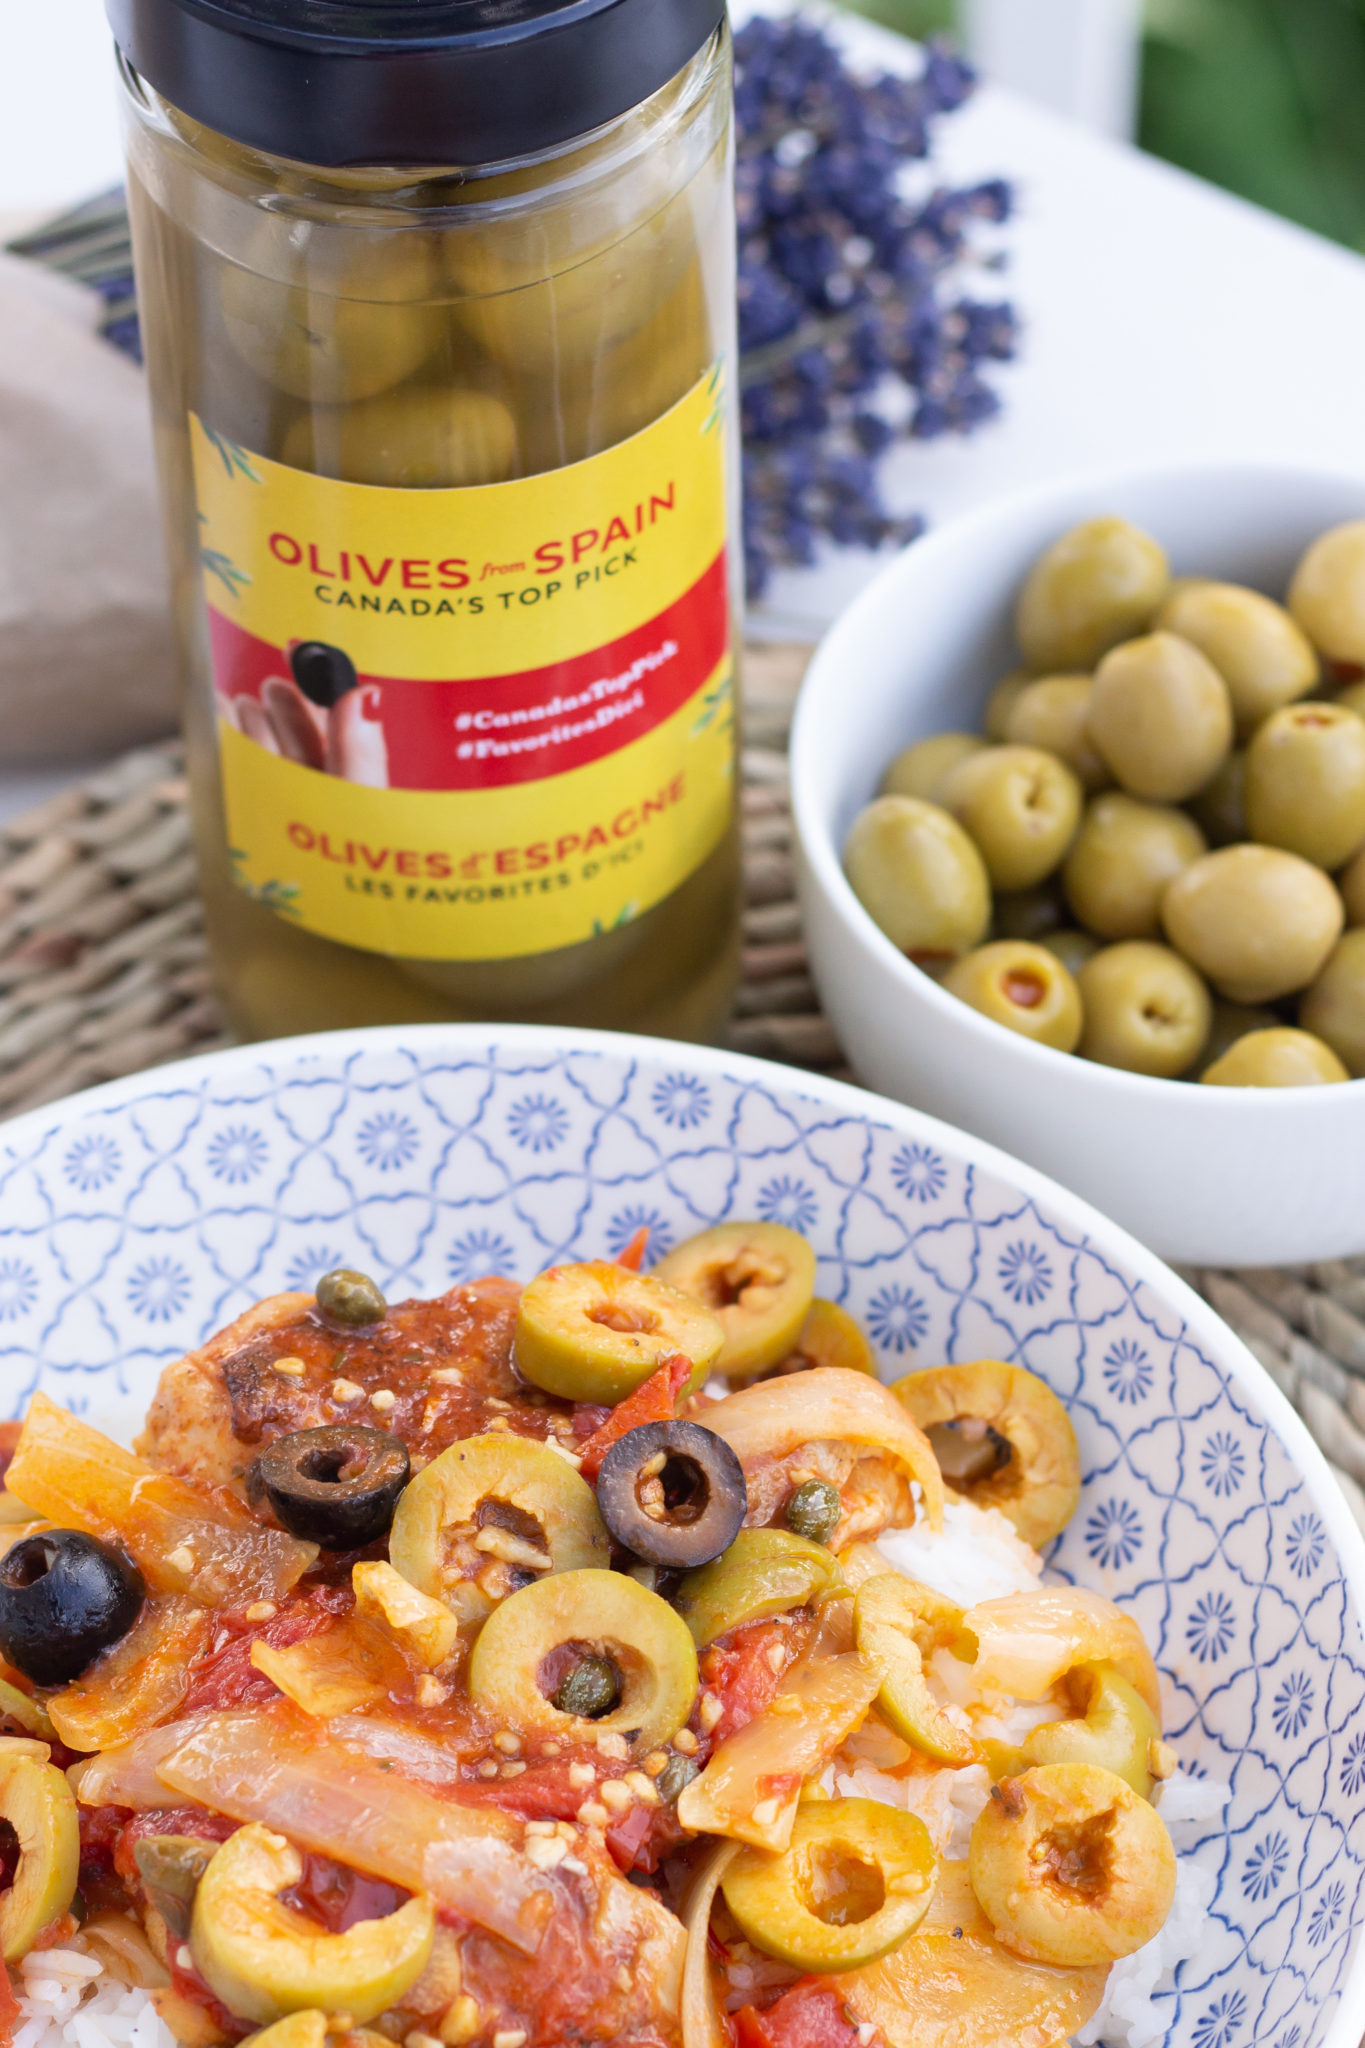 Veracruz Sauce Recipe With Olives From Spain